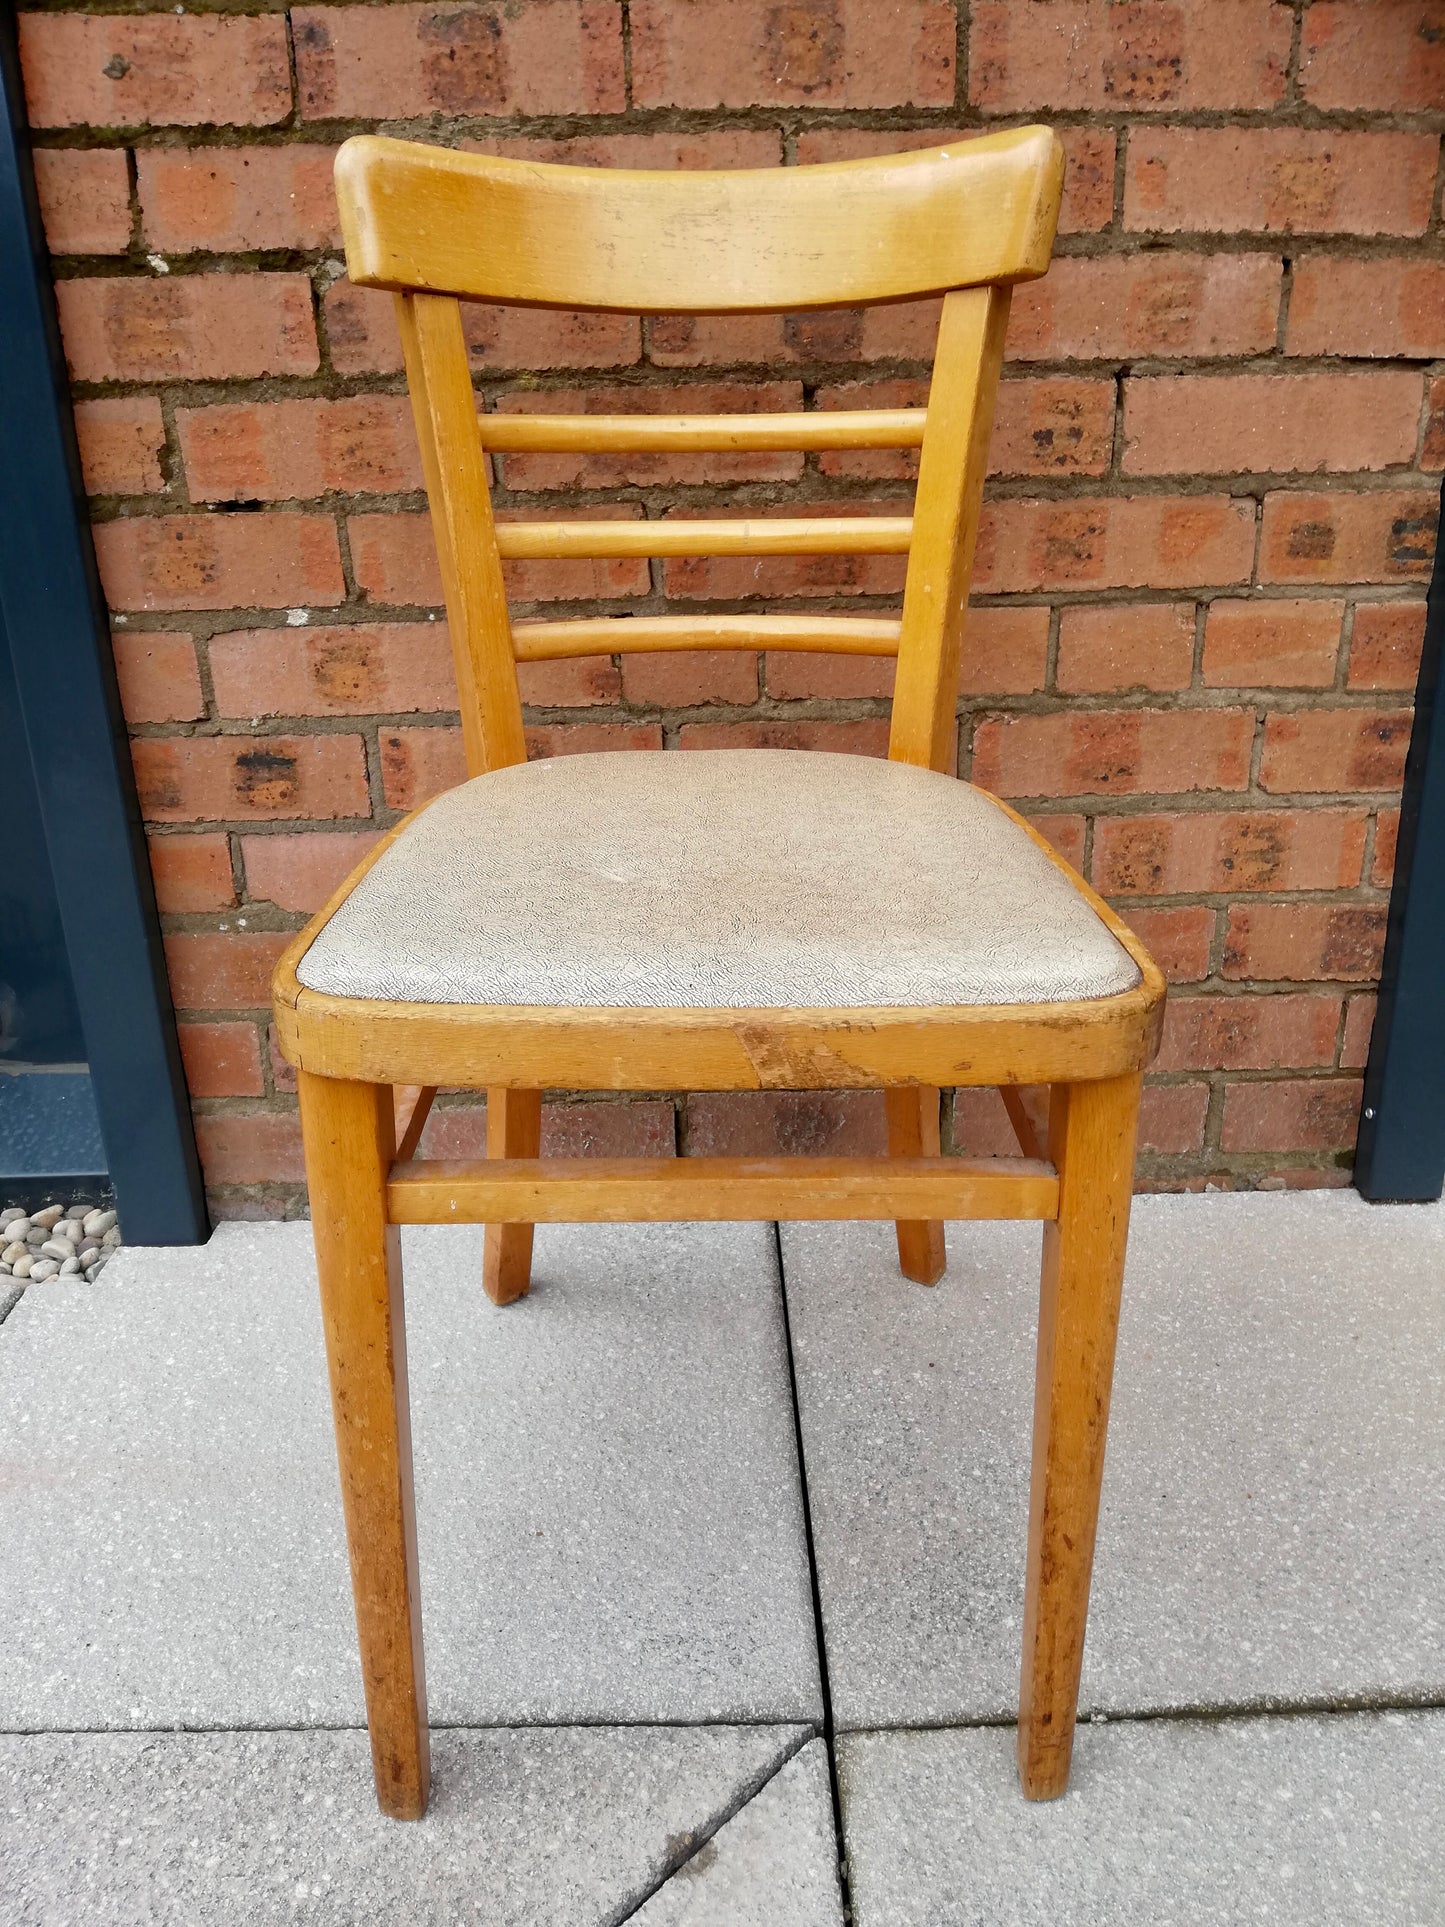 Vintage dining chair available for painting and upholstery